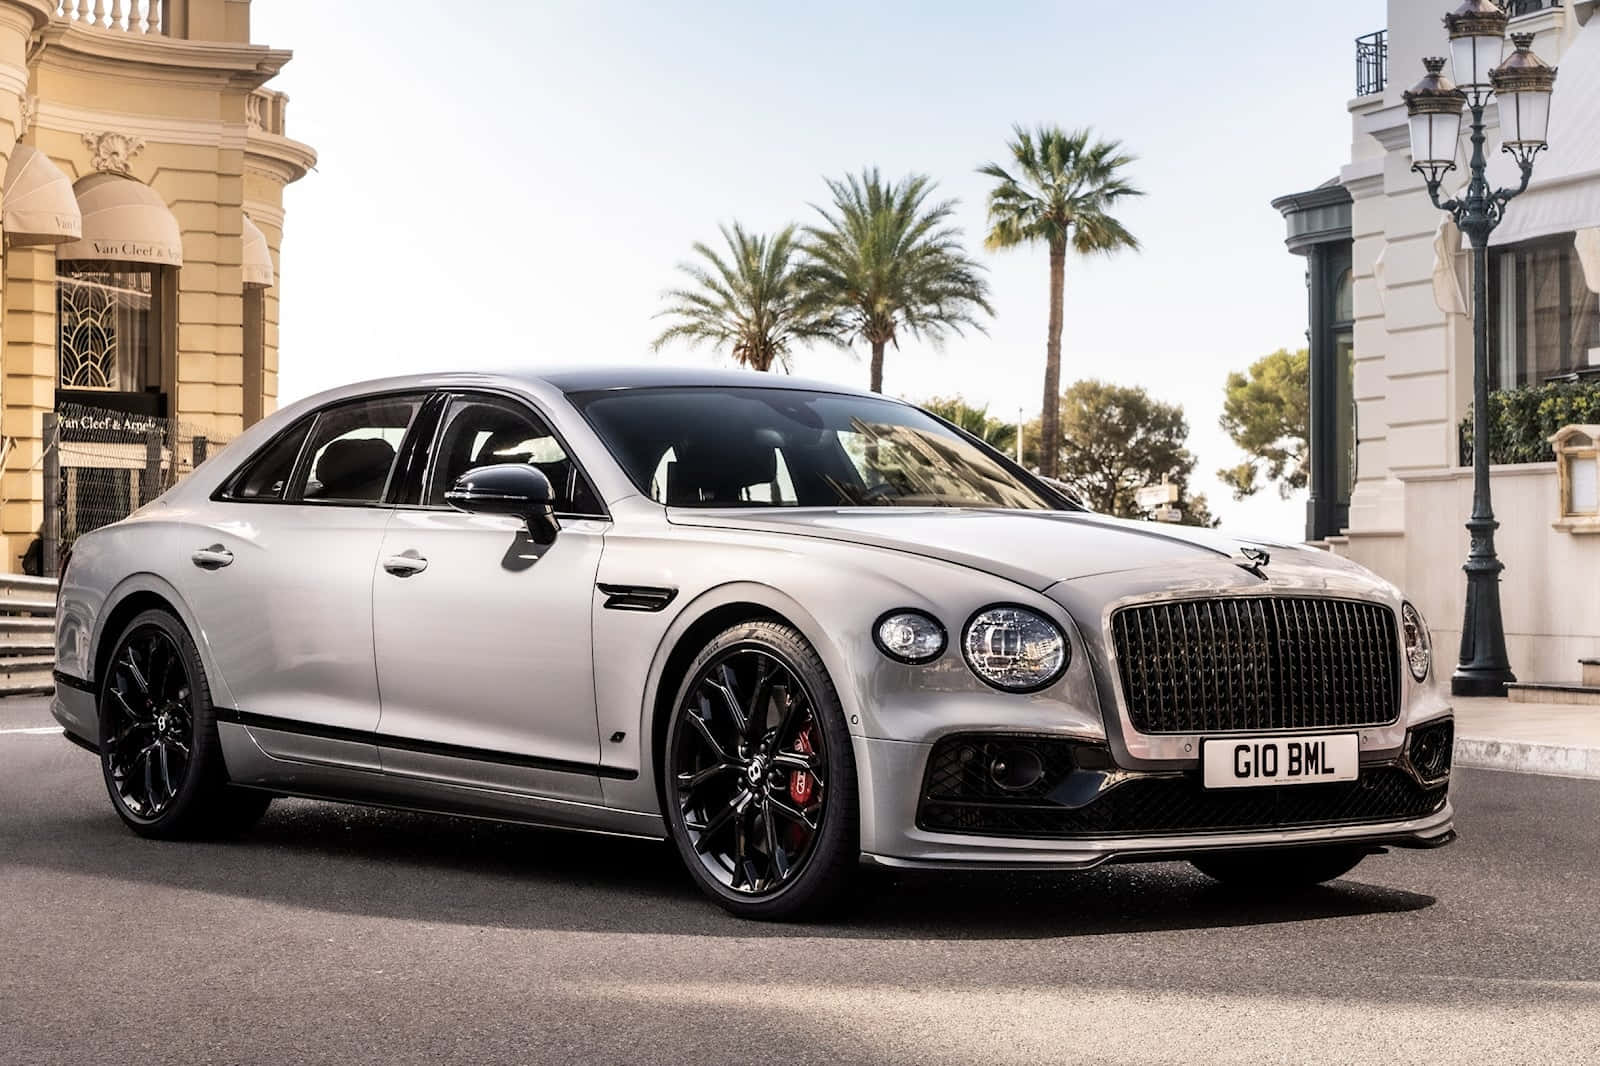 Luxurious Bentley Flying Spur cruising on the road Wallpaper